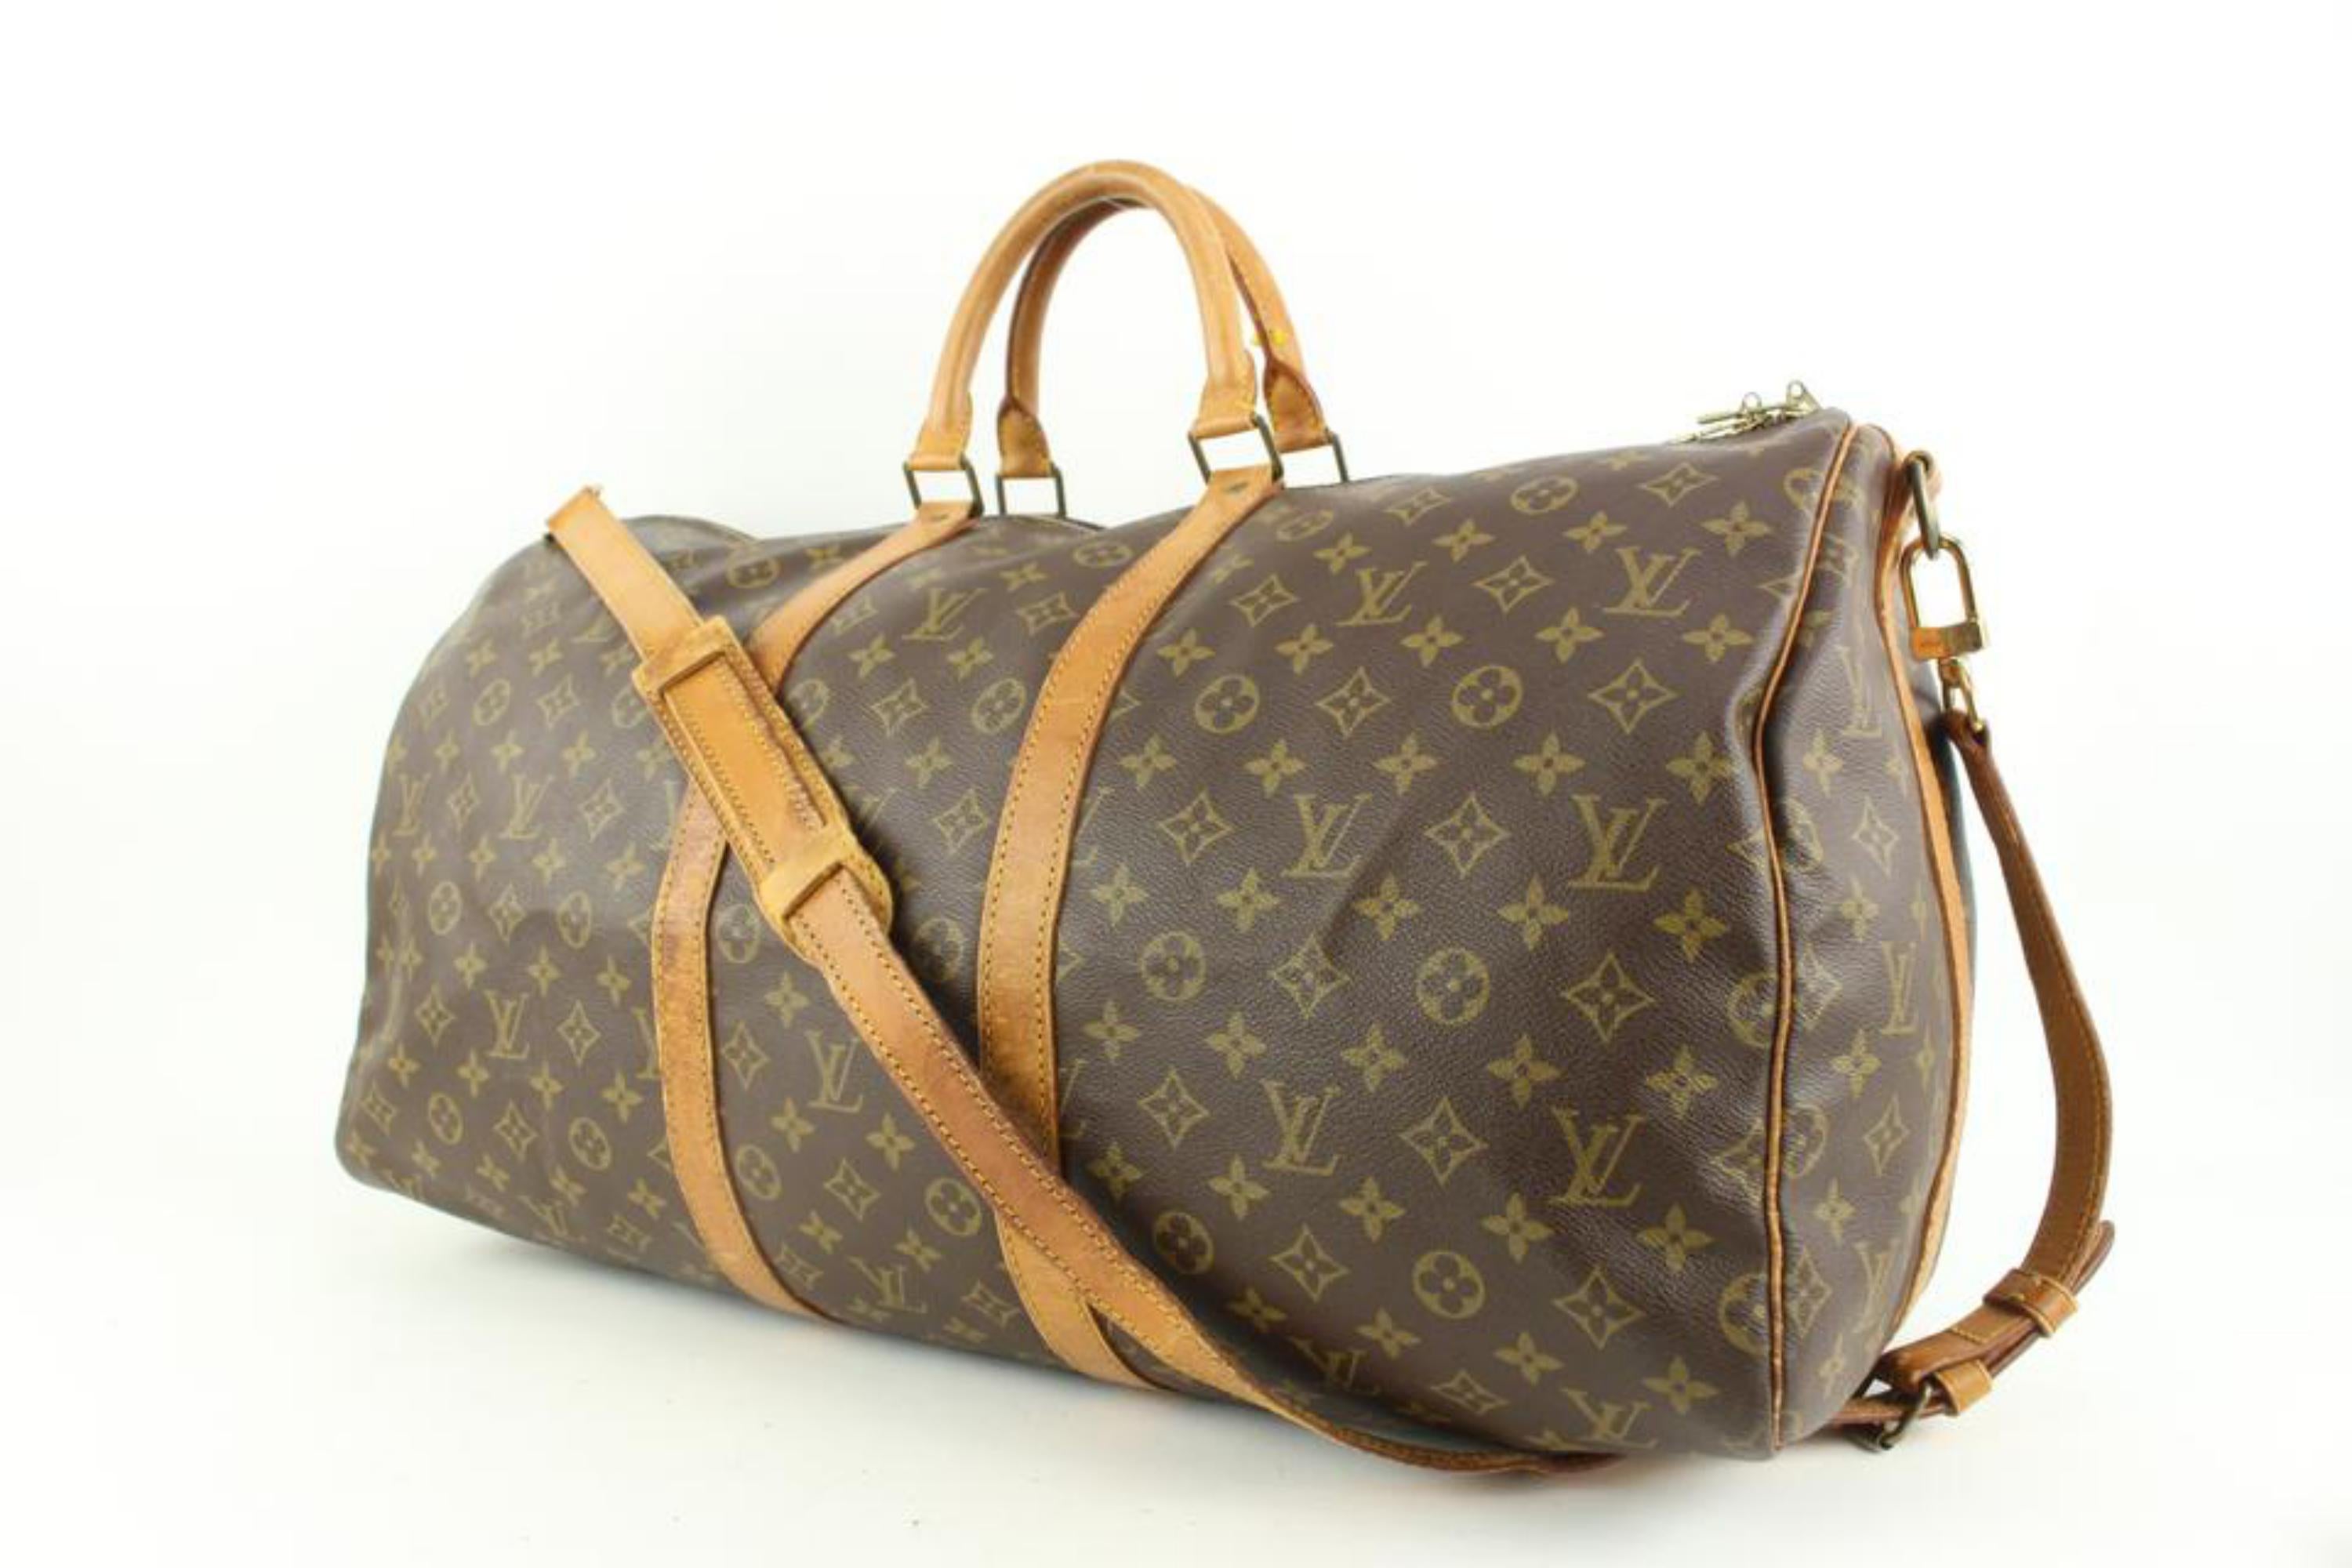 Louis Vuitton Monogram Keepall Bandouliere 55 Duffle Bag with Strap16lv44
Date Code/Serial Number:  VI8910
Made In: France
Measurements: Length:  22